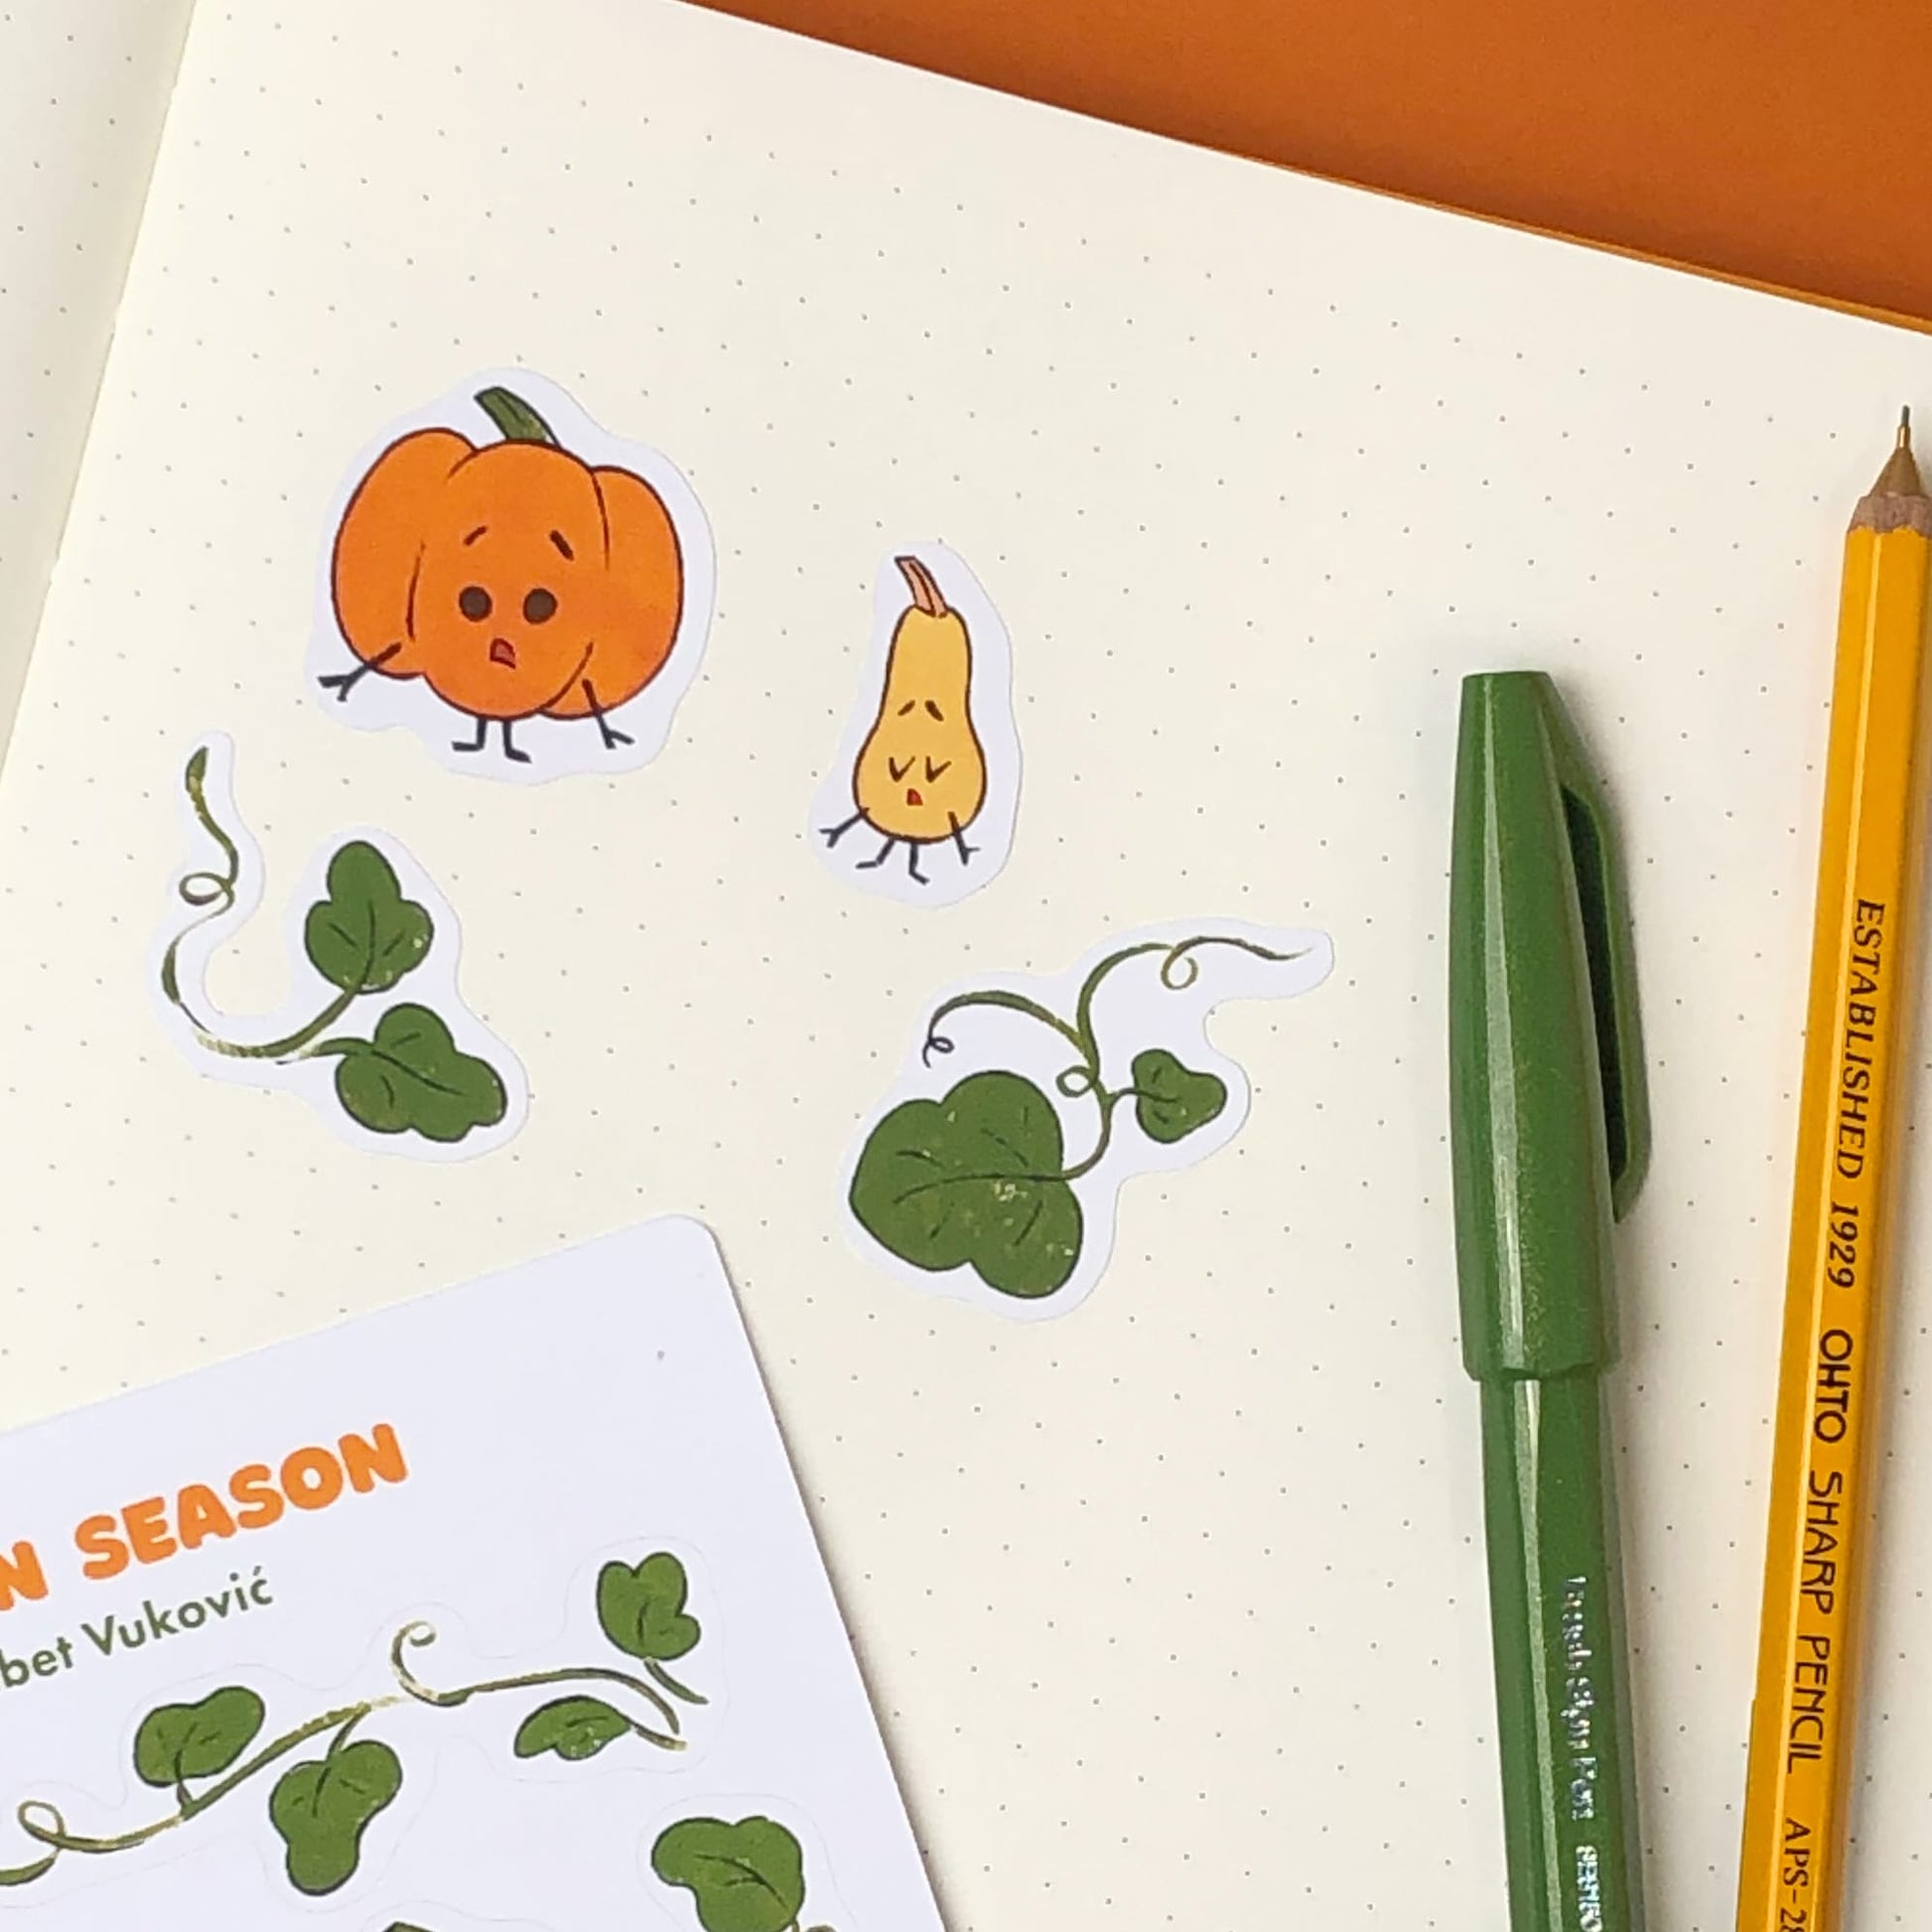 Pumpkins stickers on a notebook page beside it sit a pen and pencil.